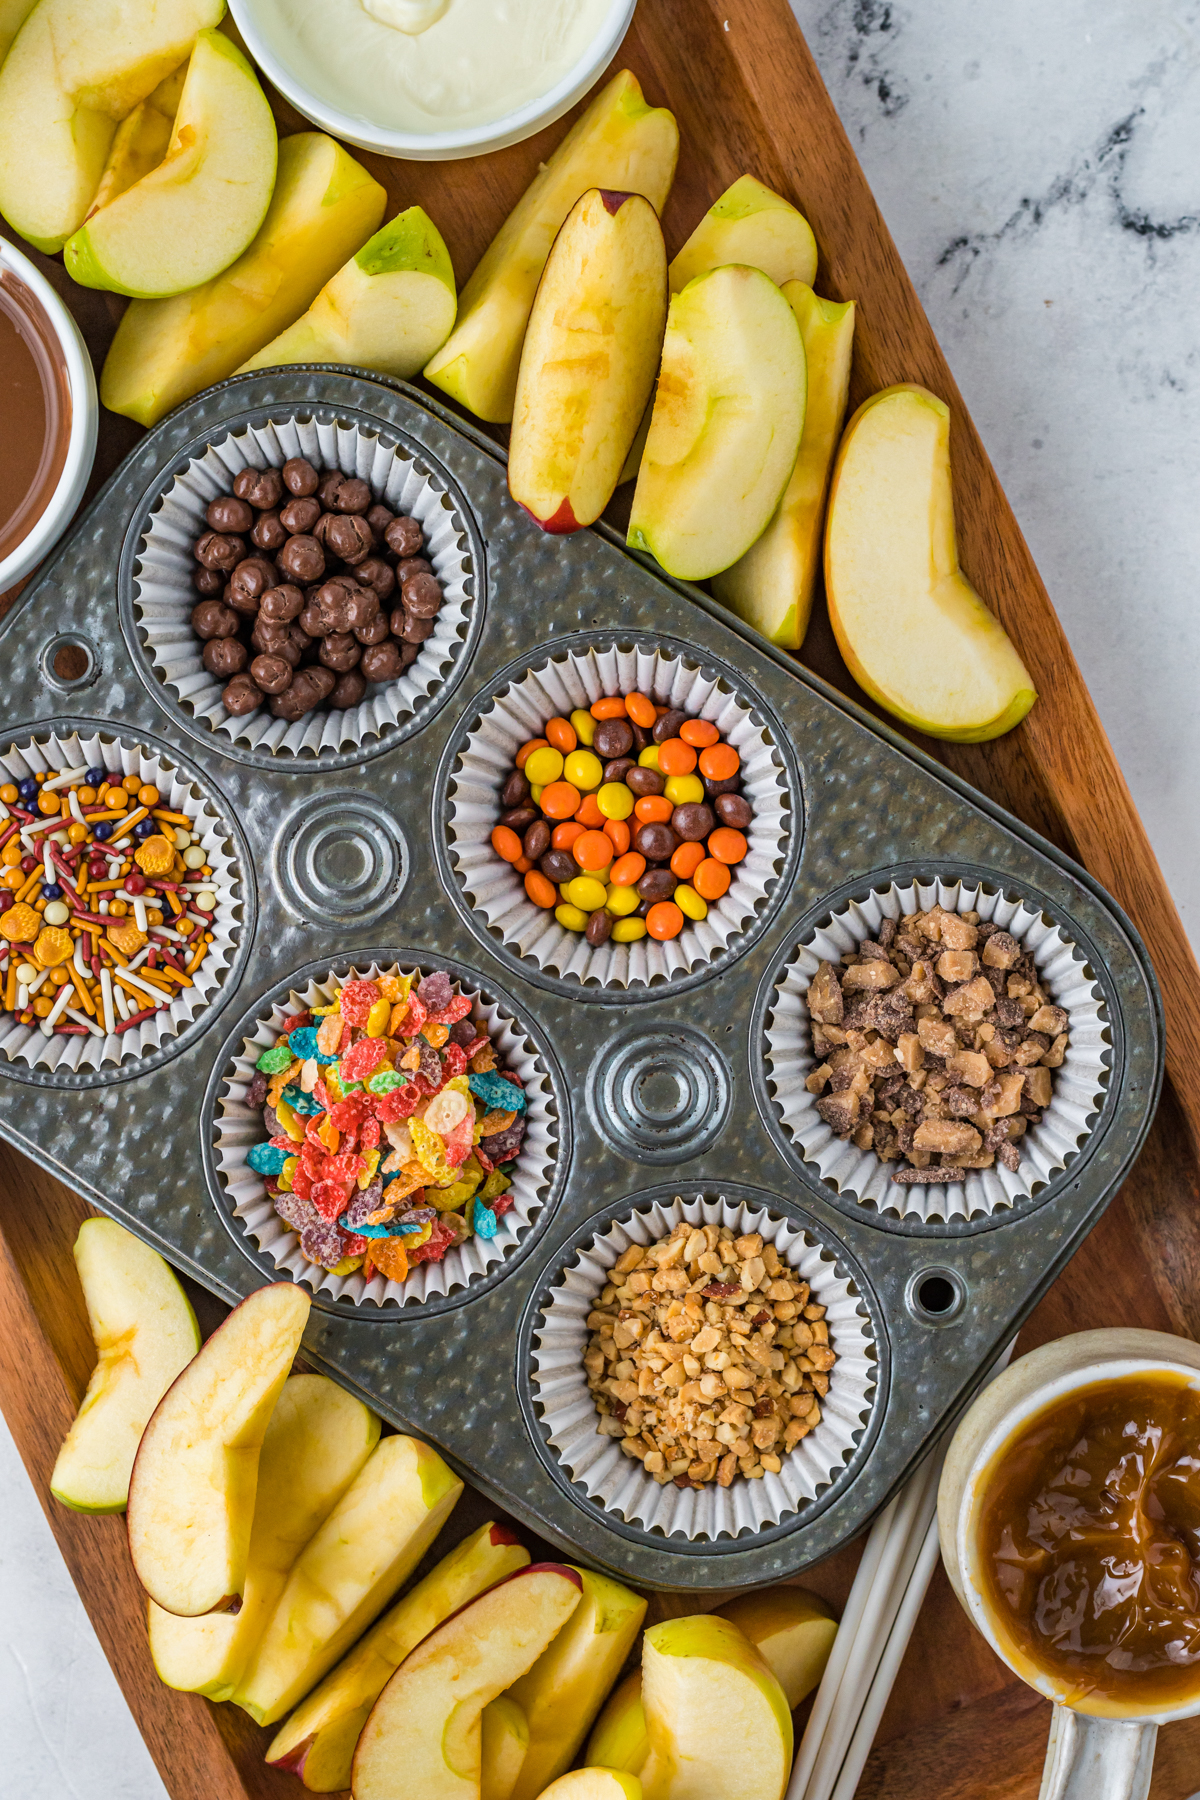 The Best Caramel Apple Board and Topping Ideas - 41